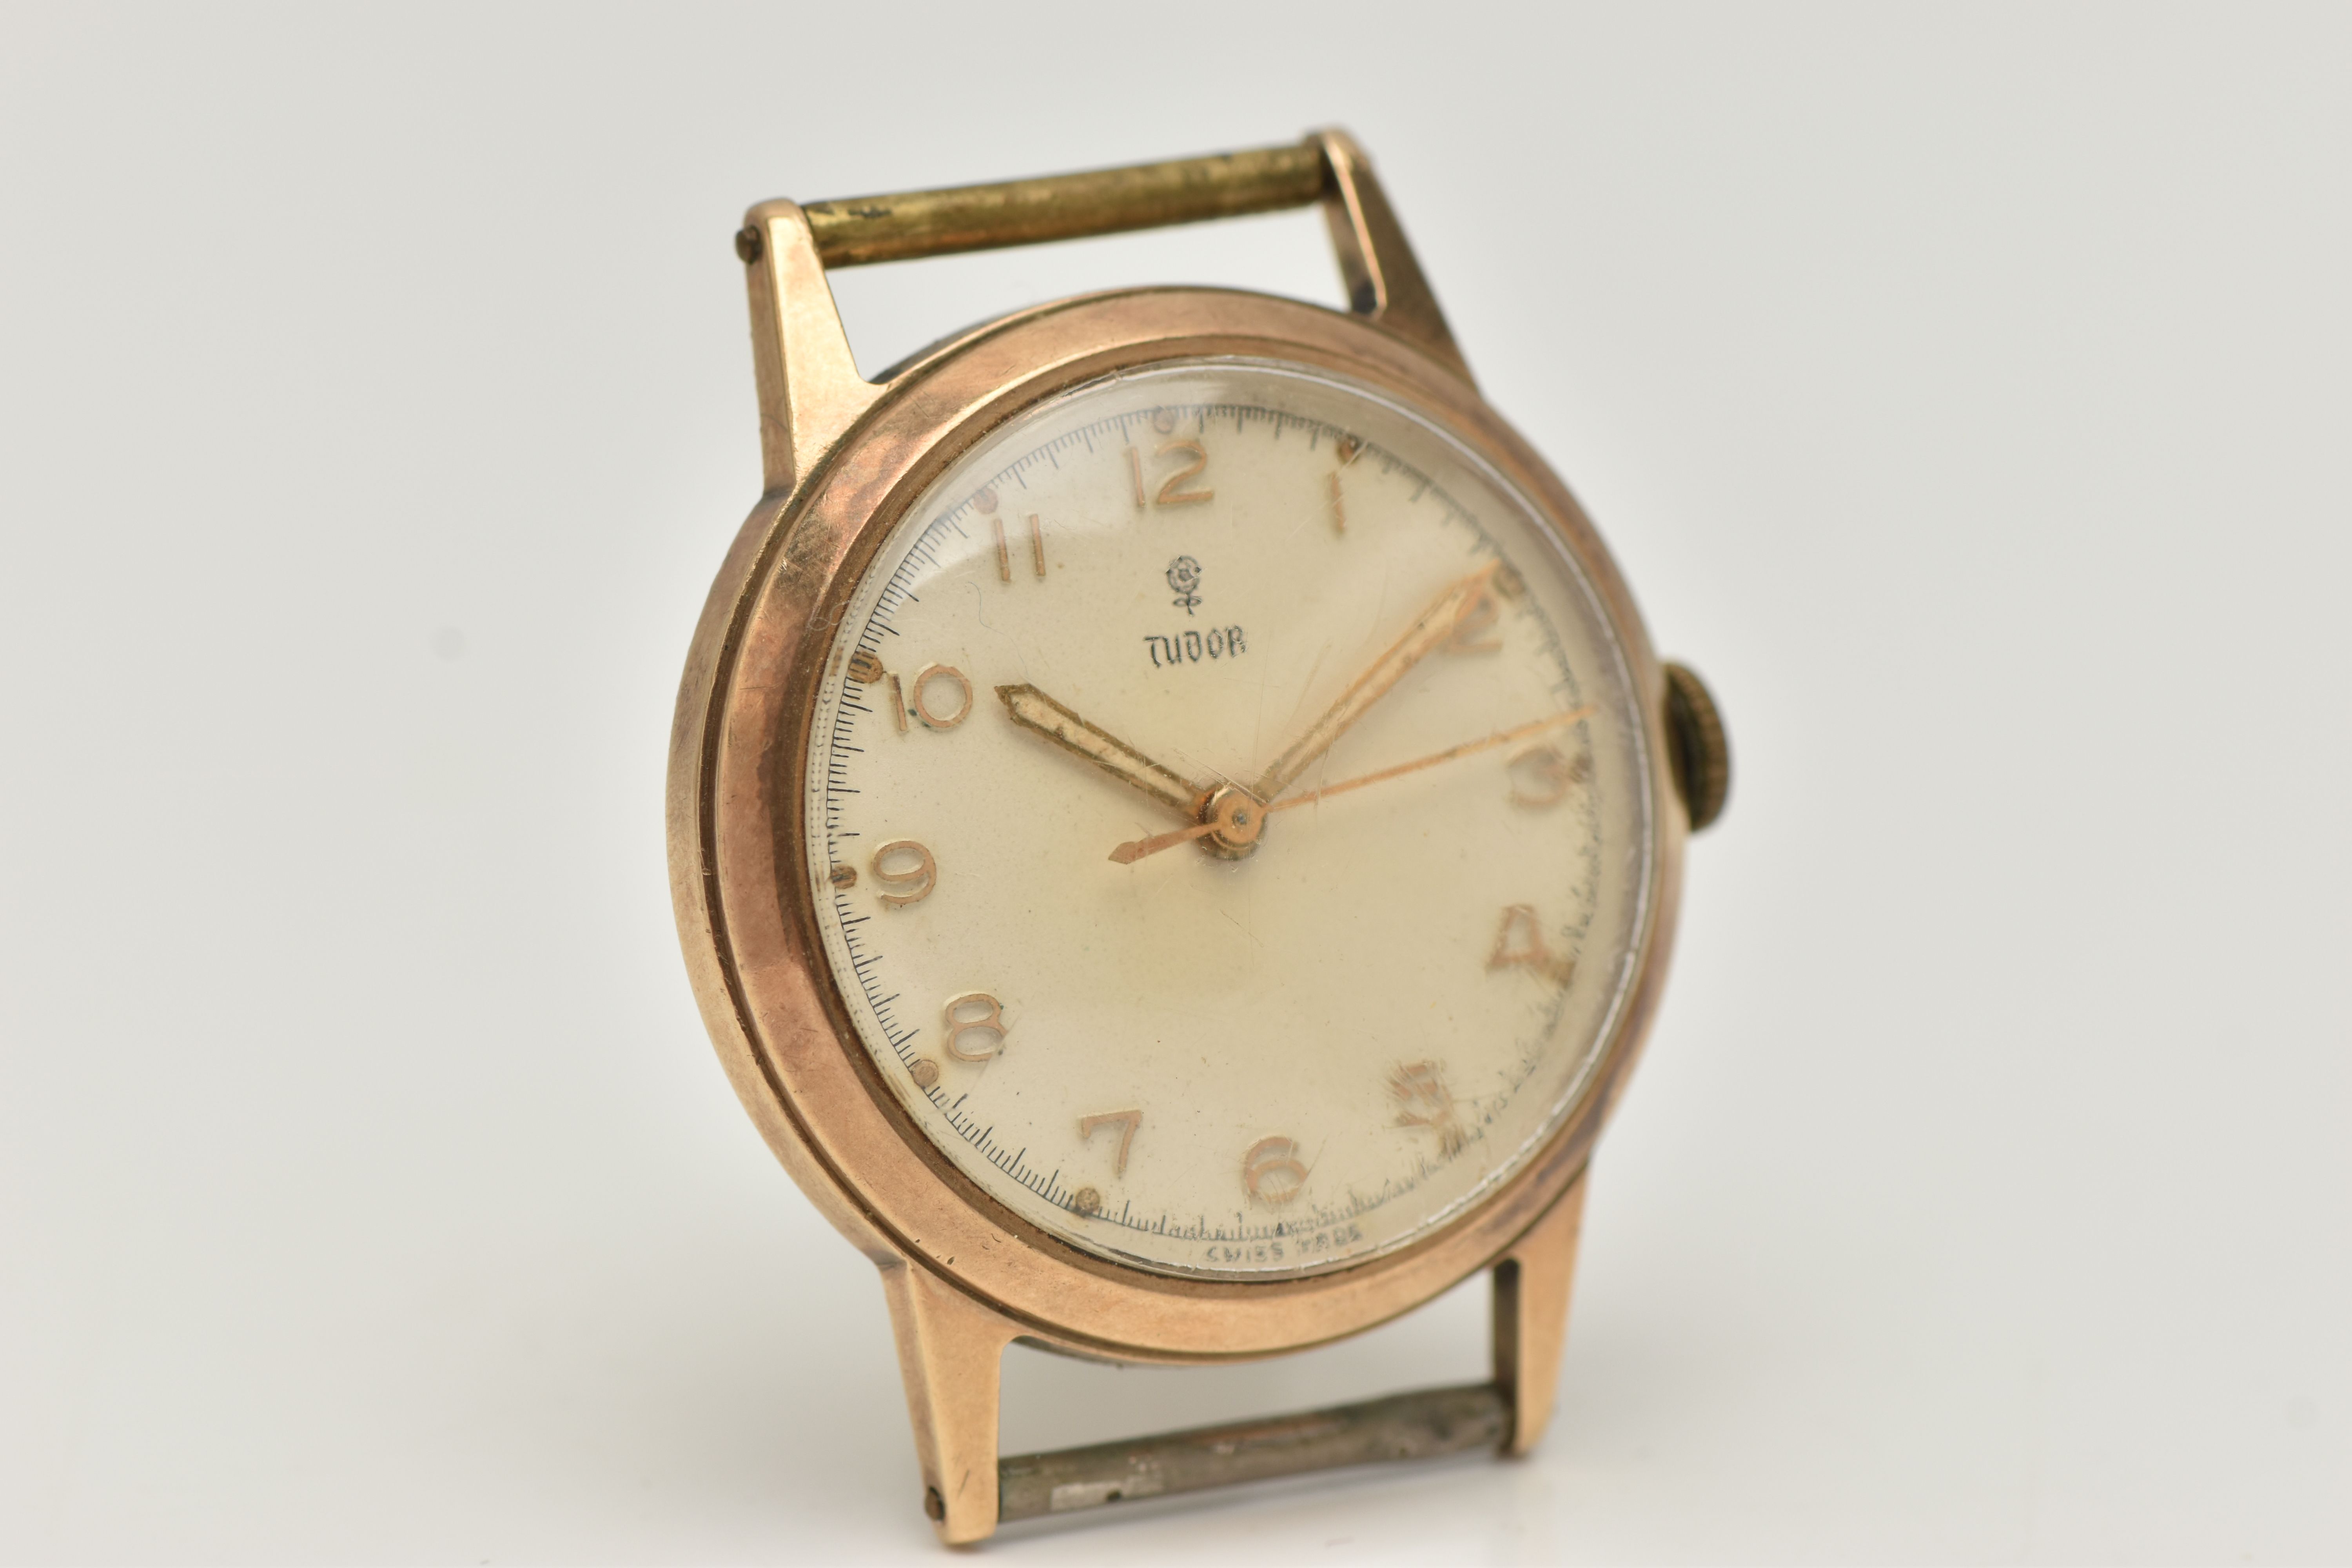 A GENTS 9CT GOLD 'TUDOR' WATCH, manual wind, round cream dial signed 'Tudor', Arabic numerals, - Image 2 of 5